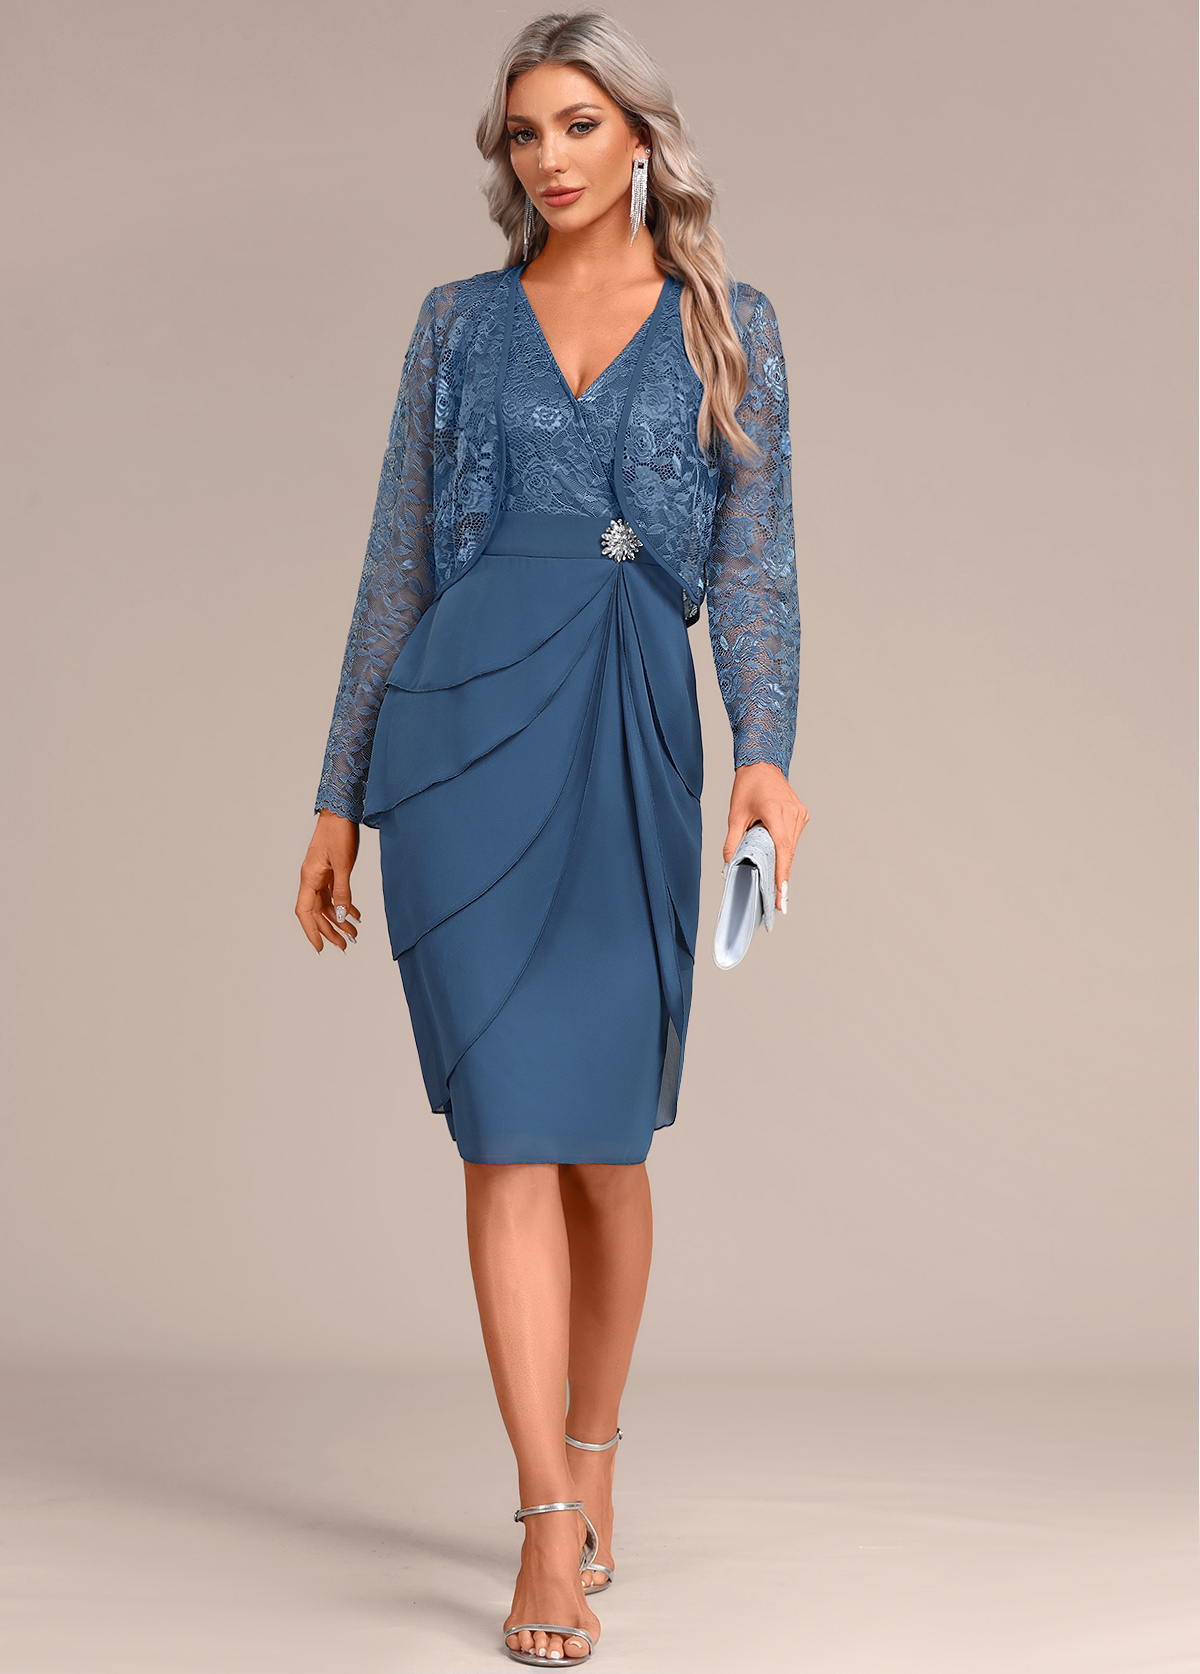 Peacock Blue Layered Two Piece Suit Dress and Cardigan